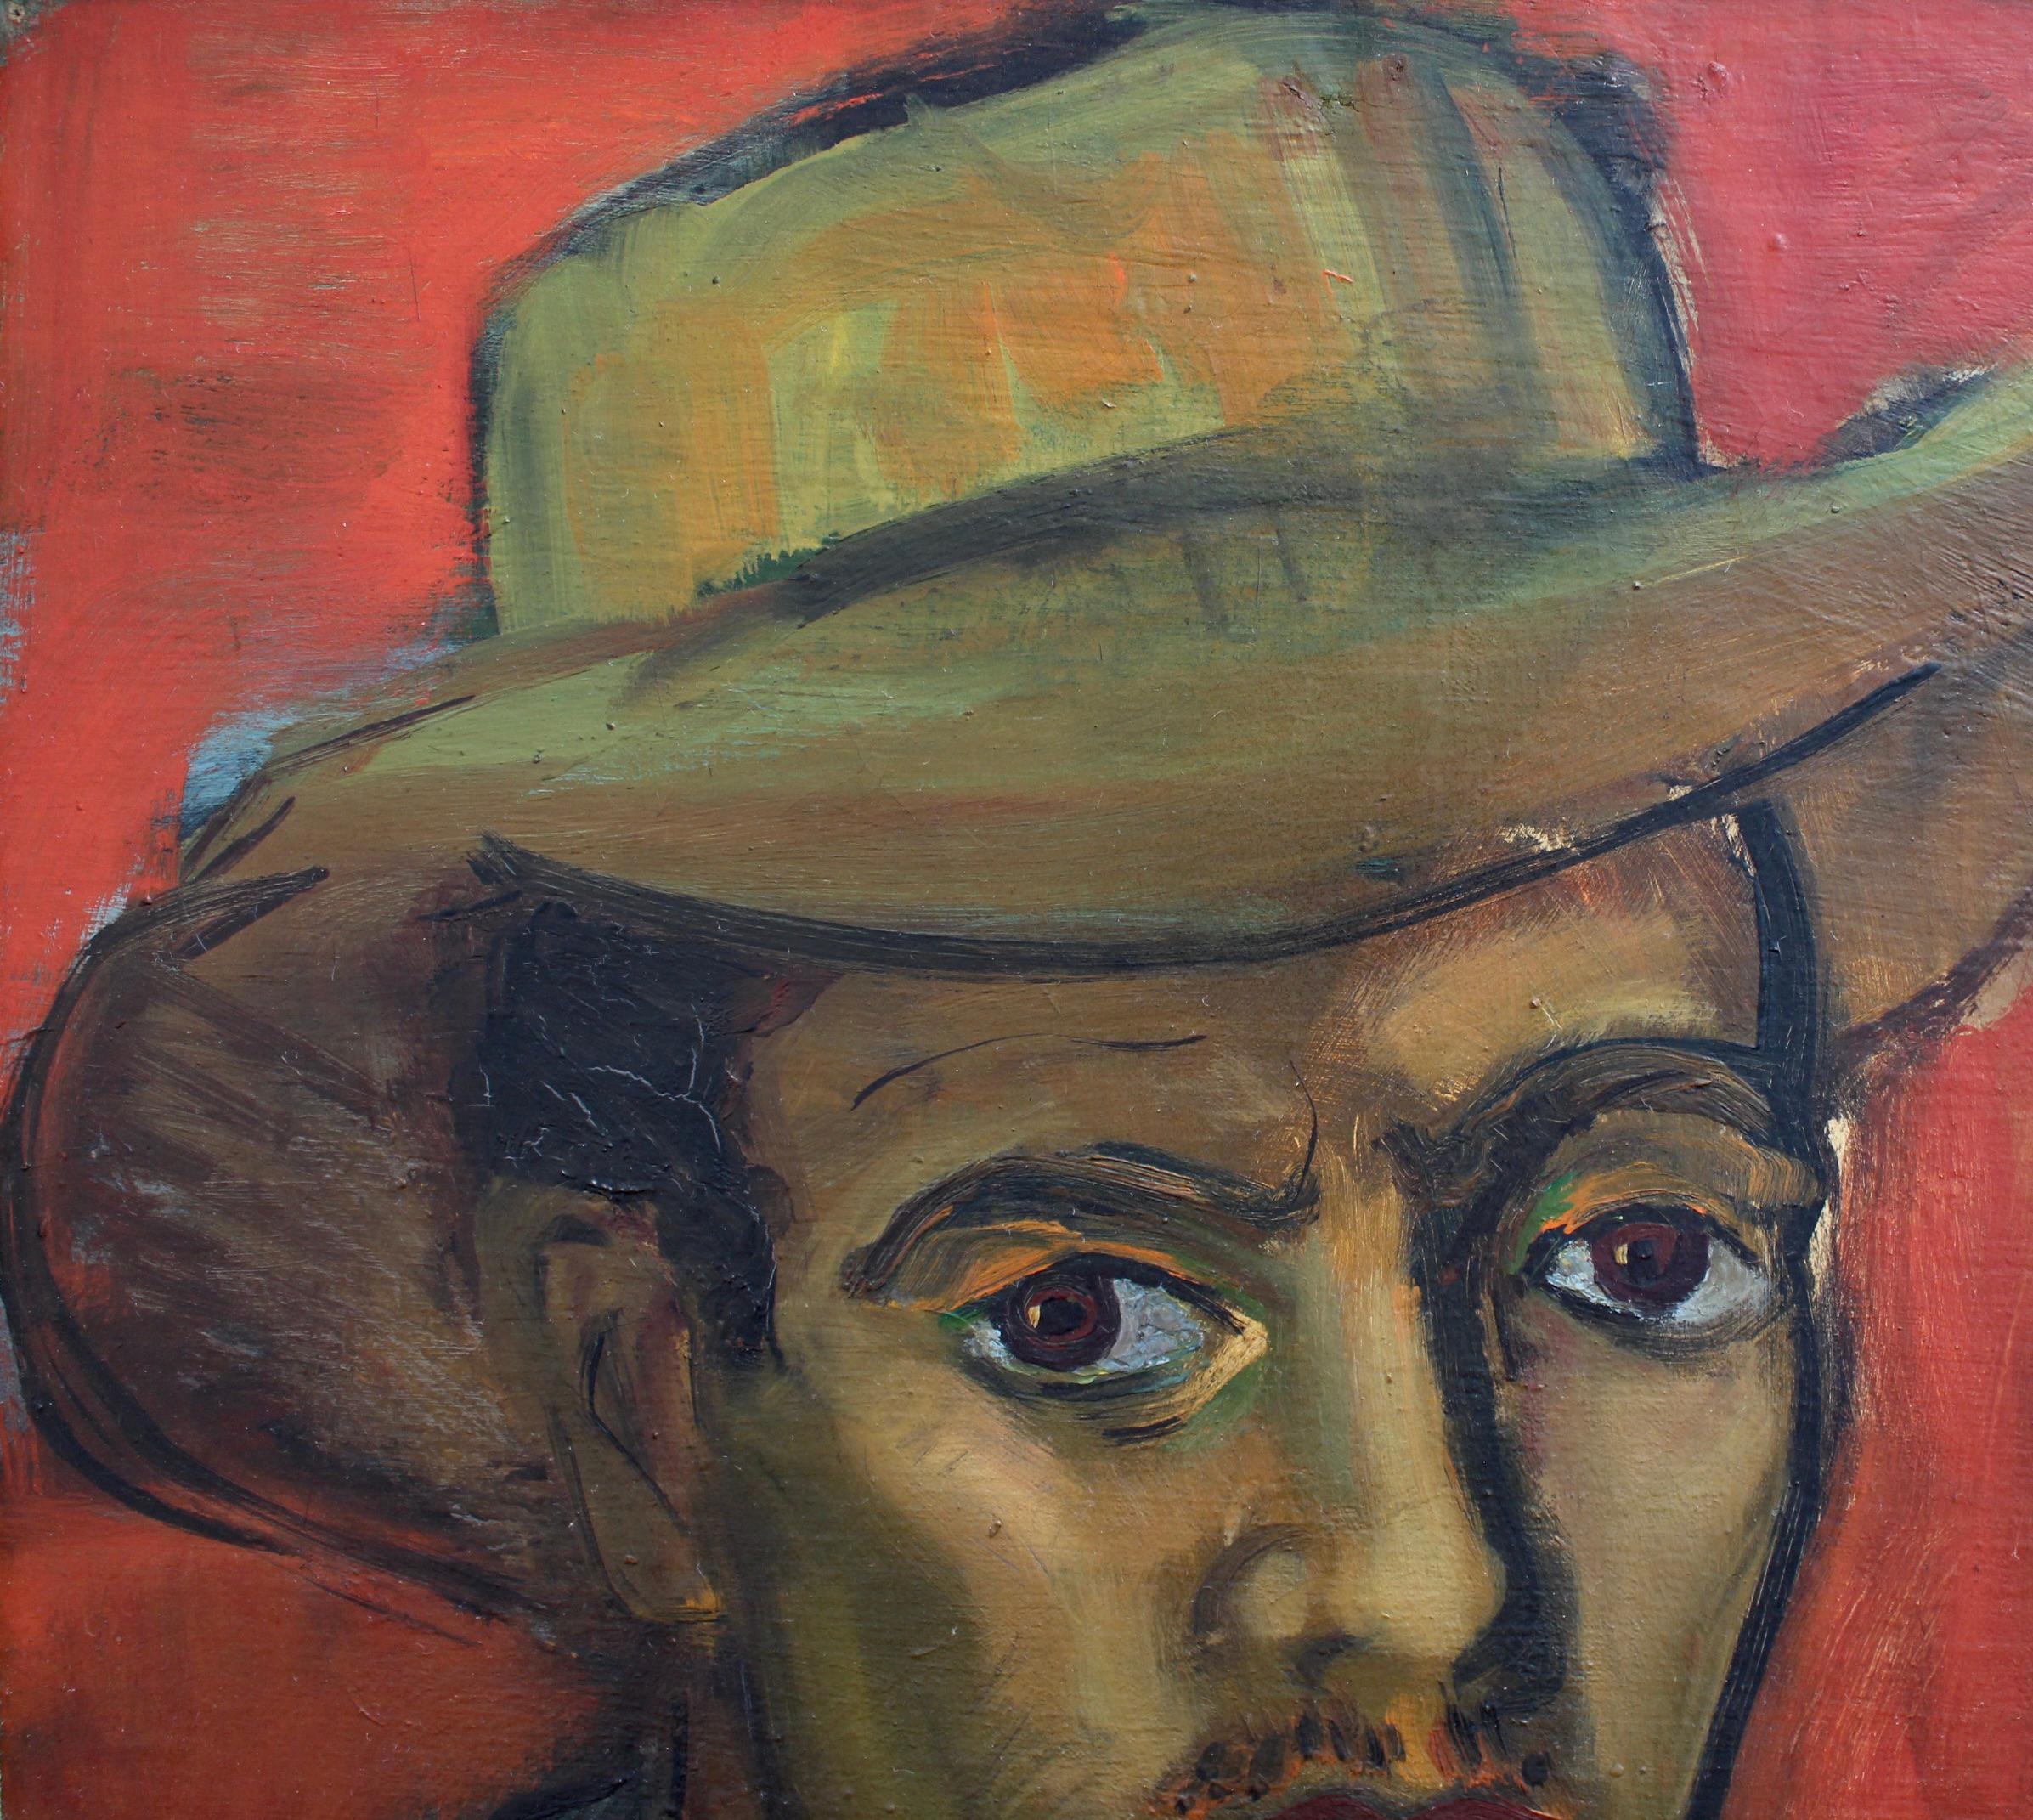 'Le Gardian', oil on canvas, by Jacqueline Padovani (circa 1950s-60s). Although this young hatted man looks as though he’s just swaggered out of the wild west with his wide-brimmed hat, we cannot call him a cowboy. That's an American term. This